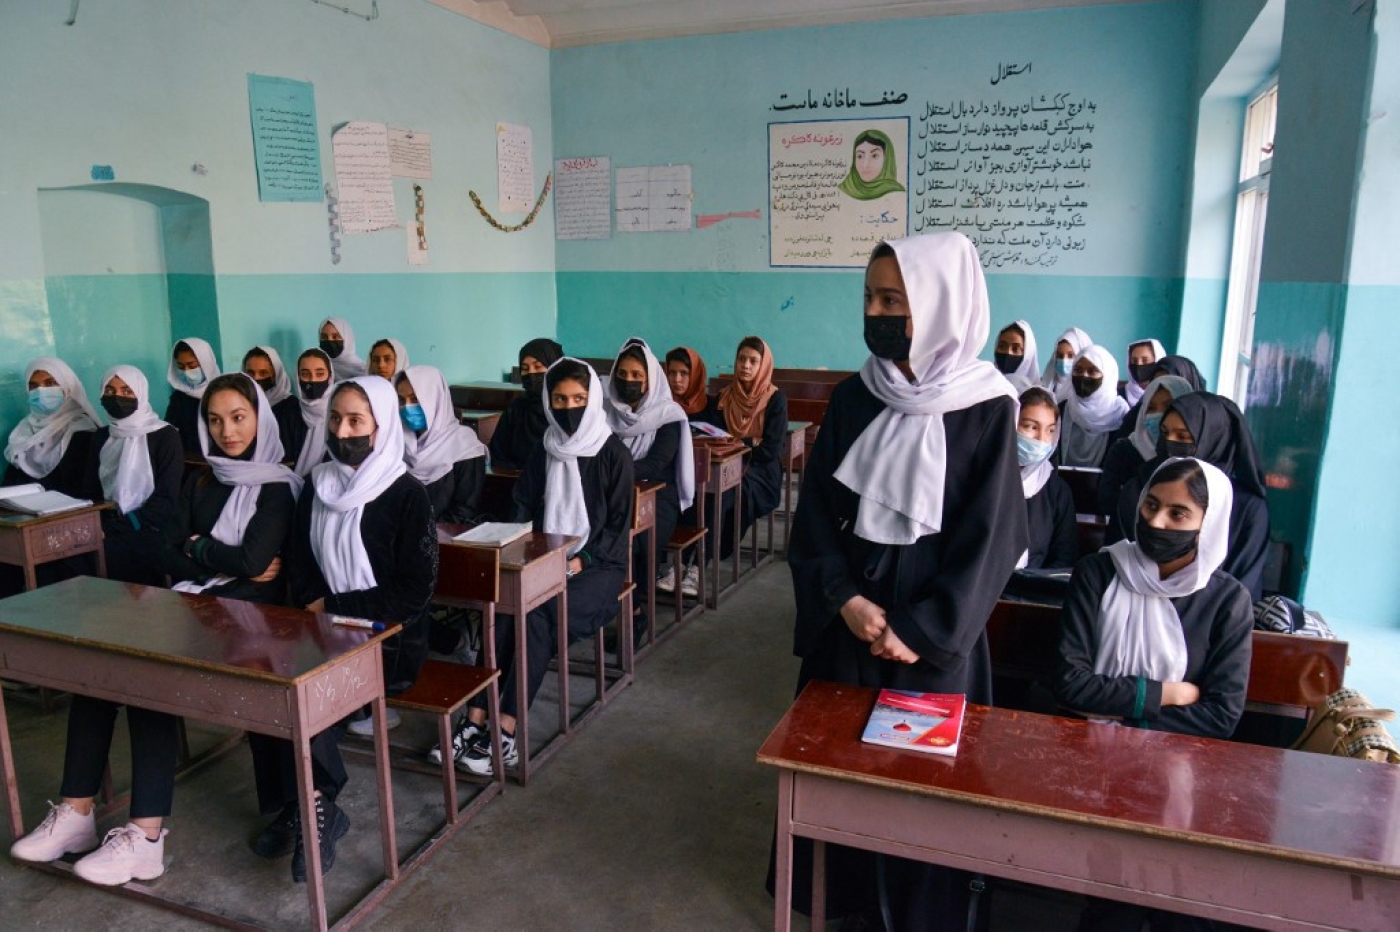 Girls attend a class after their school reopened in Kabul on 23 March 2022. The Taliban ordered girls' secondary schools in Afghanistan to shut just hours later (AFP)